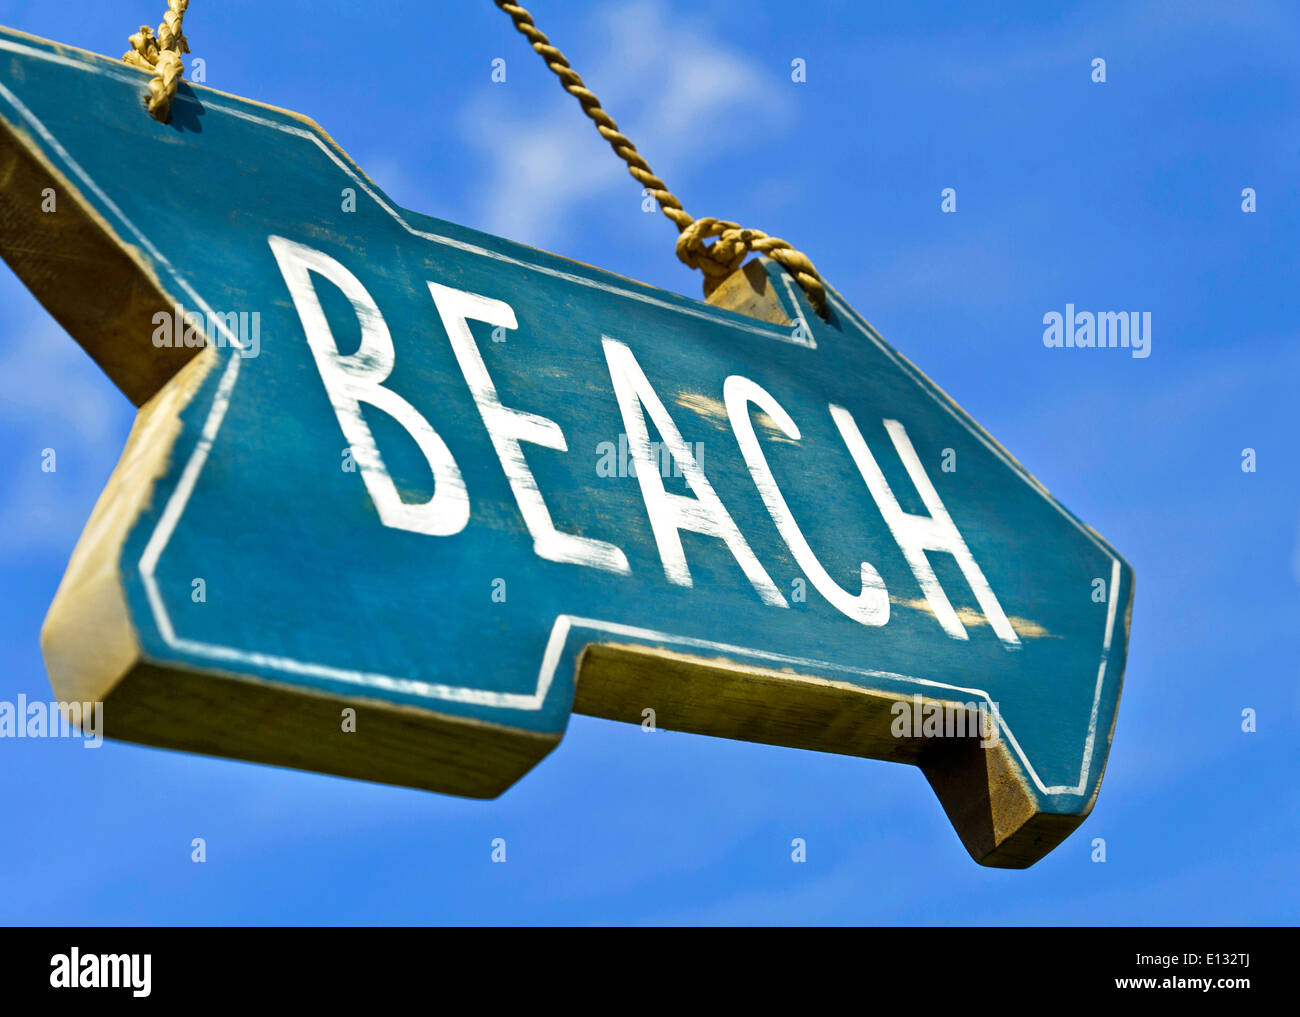 Low angle view of rustic weathered 'Beach' sign against blue sky summer holiday vacation concept Stock Photo